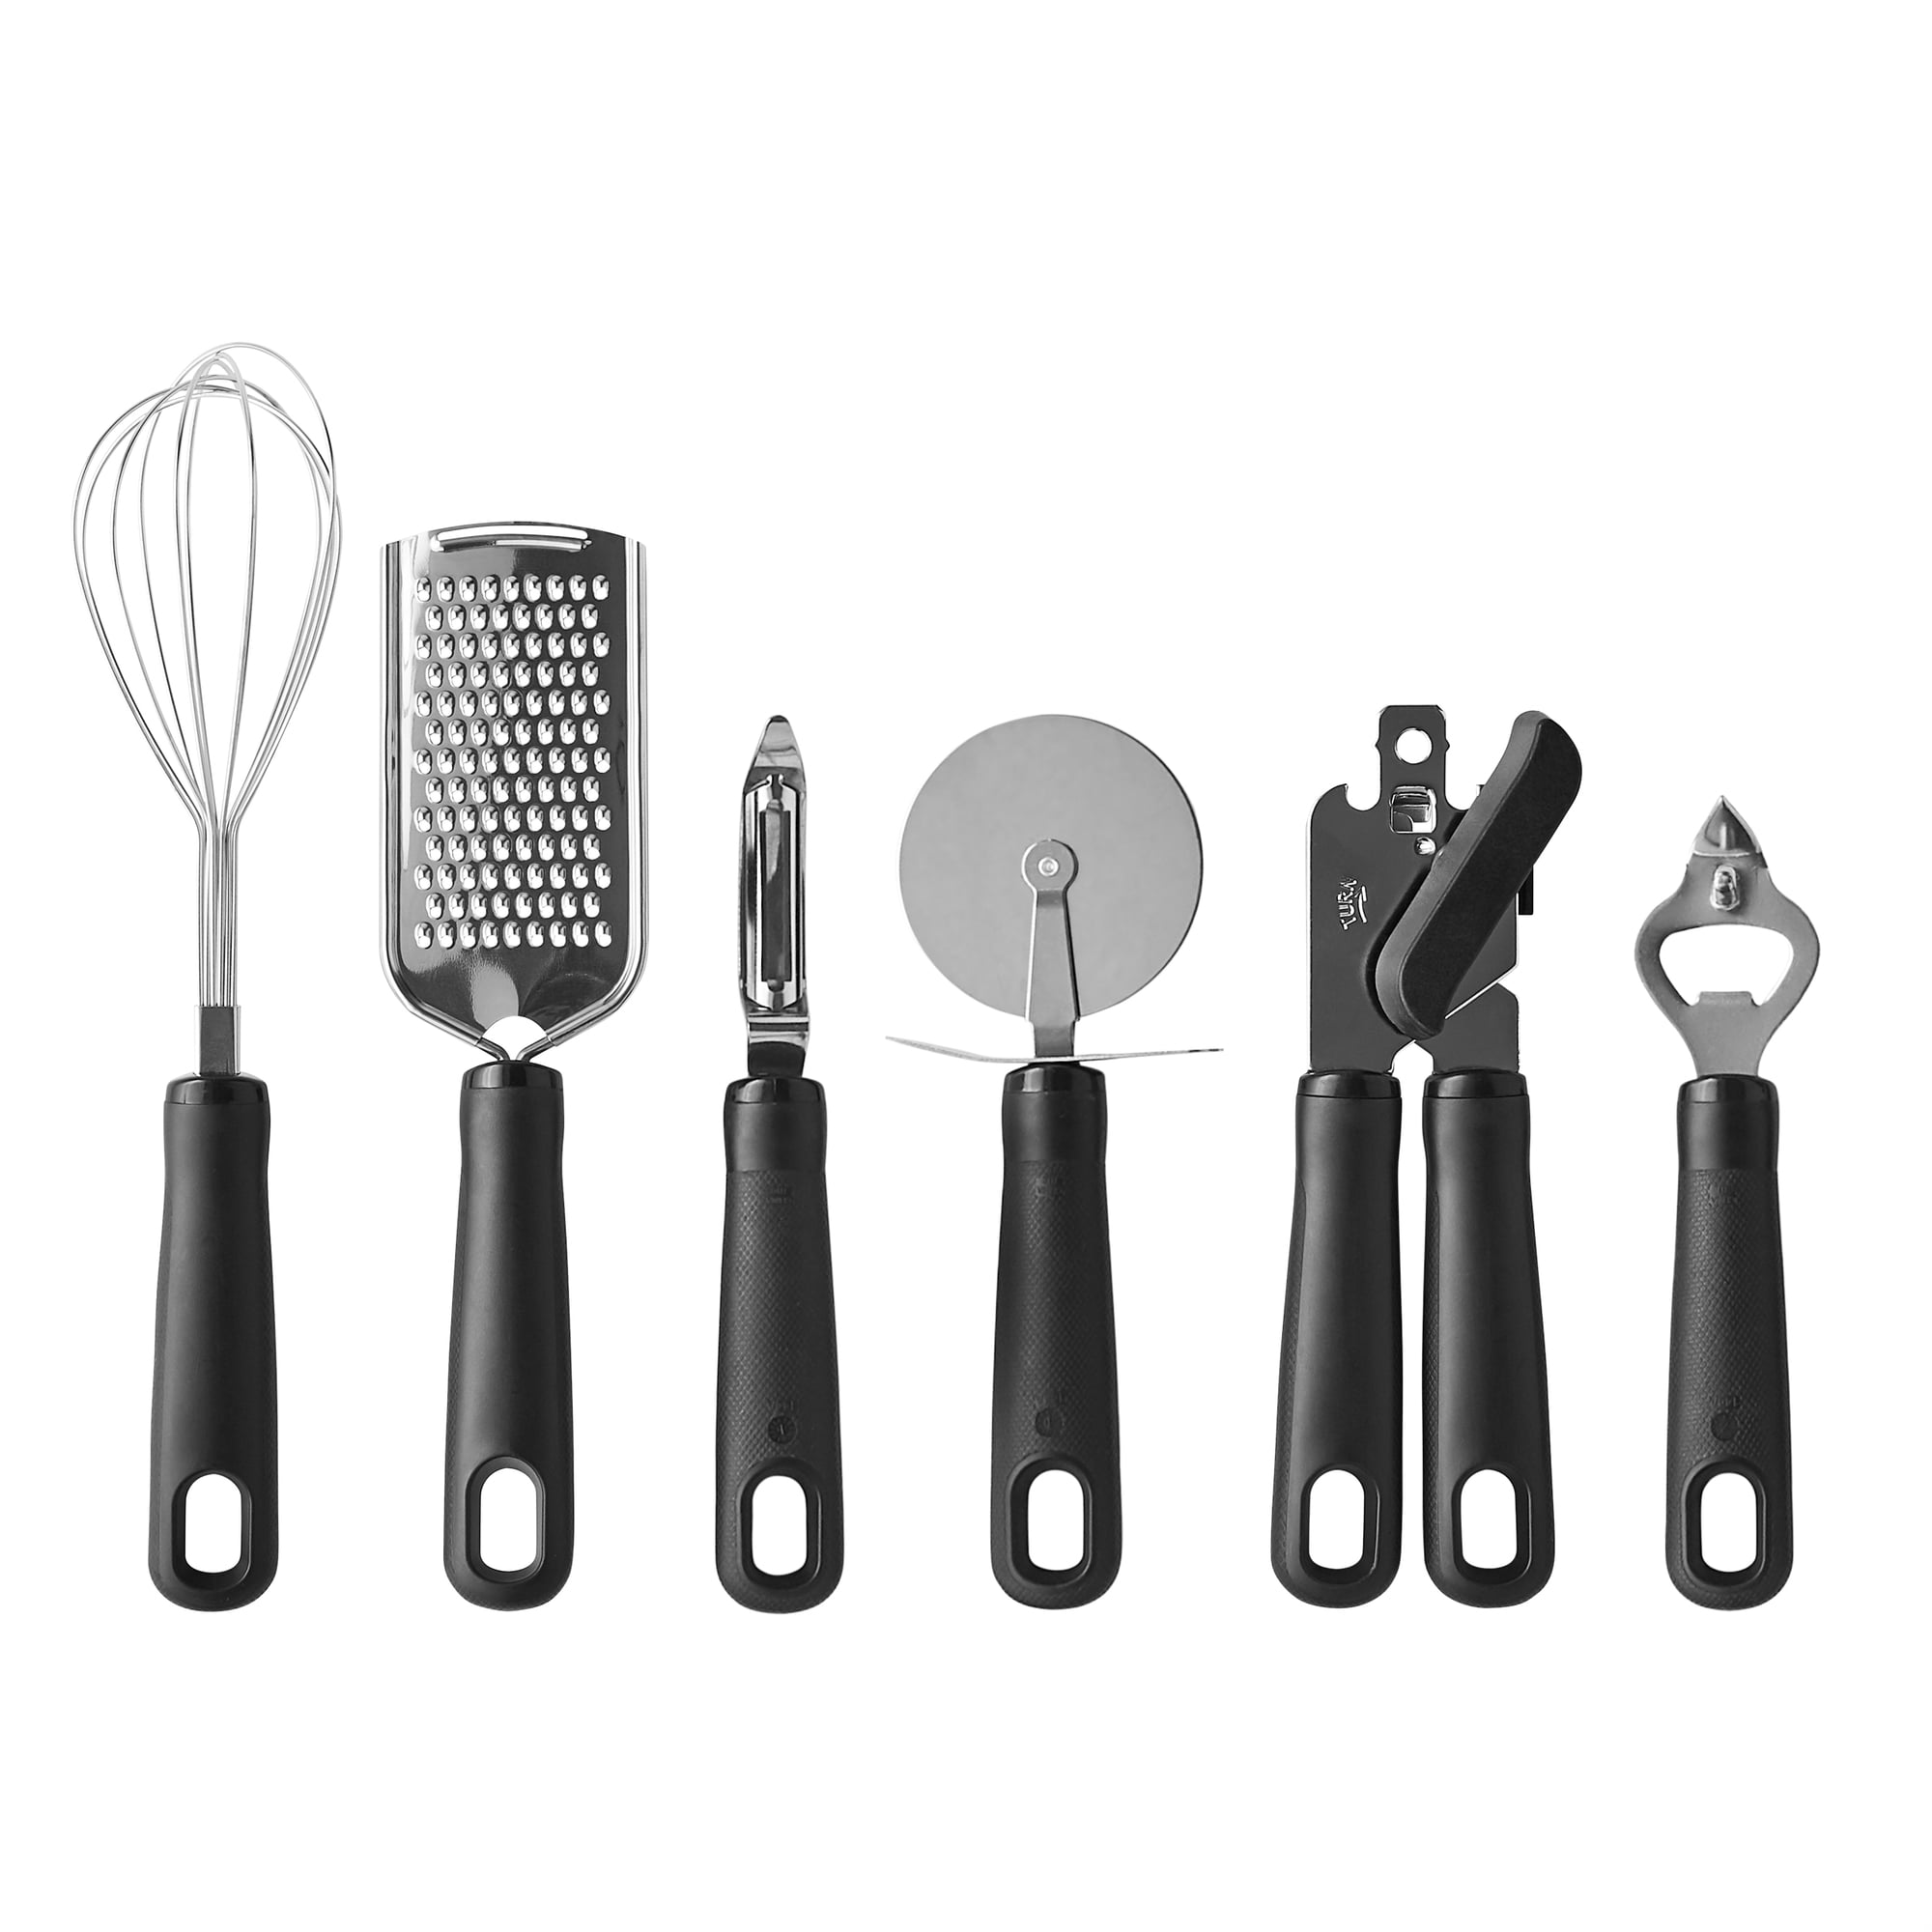 Country Kitchen 6 Pc Essentials Kitchen Stainless Steel Gadget Set Black  Gun Metal with Soft Touch Black Handles for Cooking